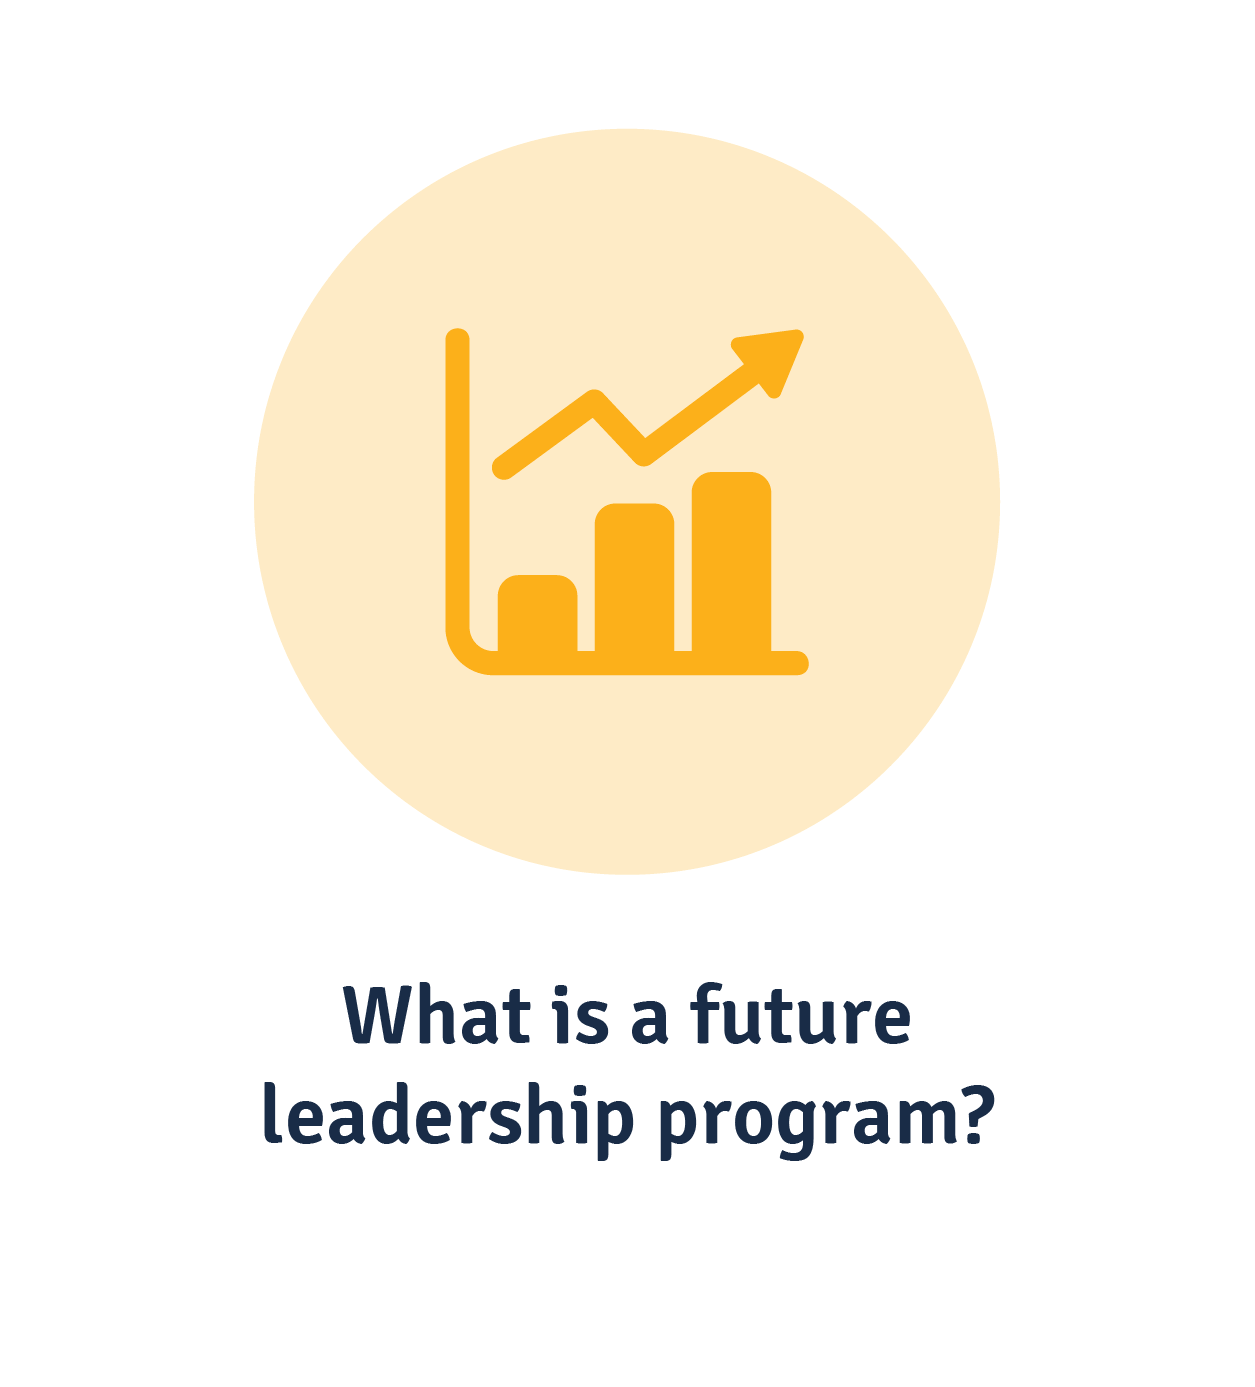 What is a future leadership program